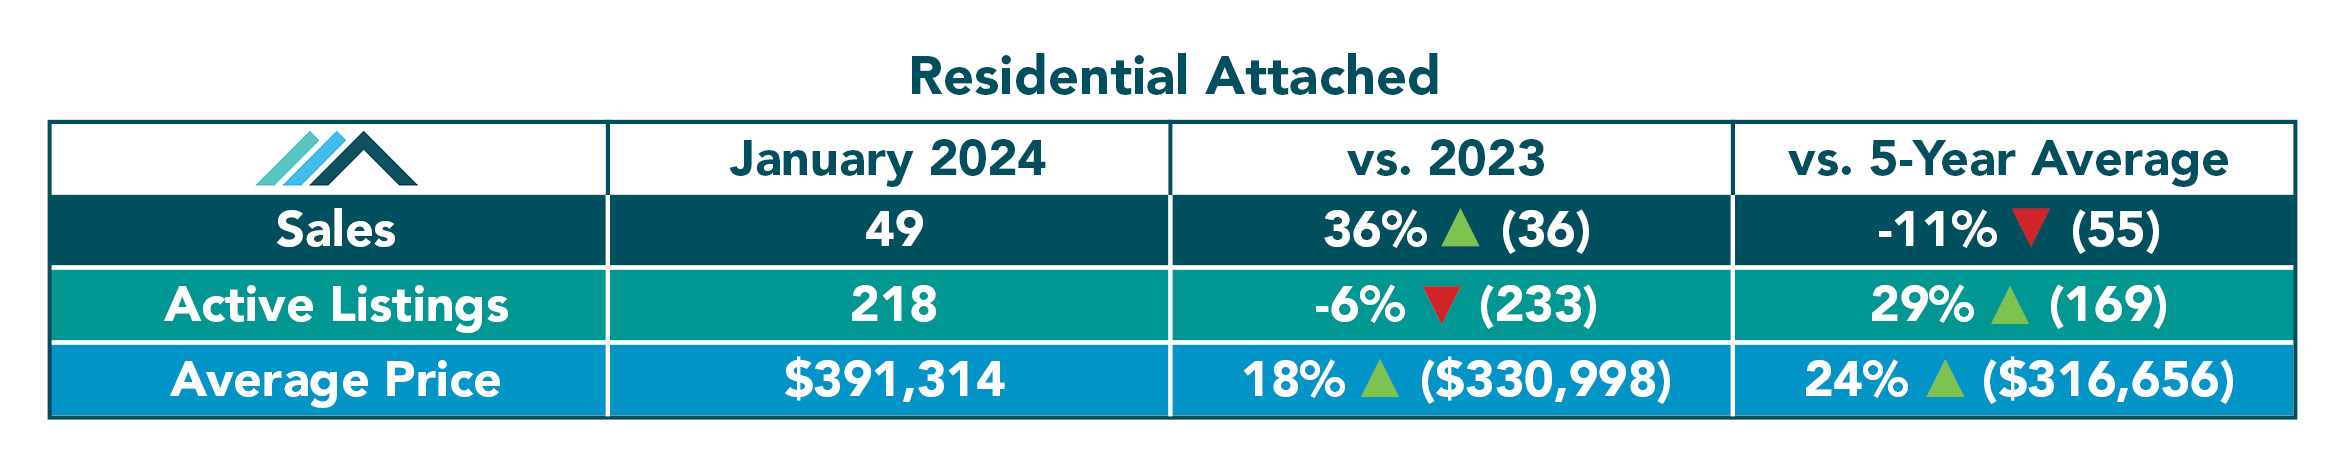 Residential Attached Tables January 20243.jpg (0 b)